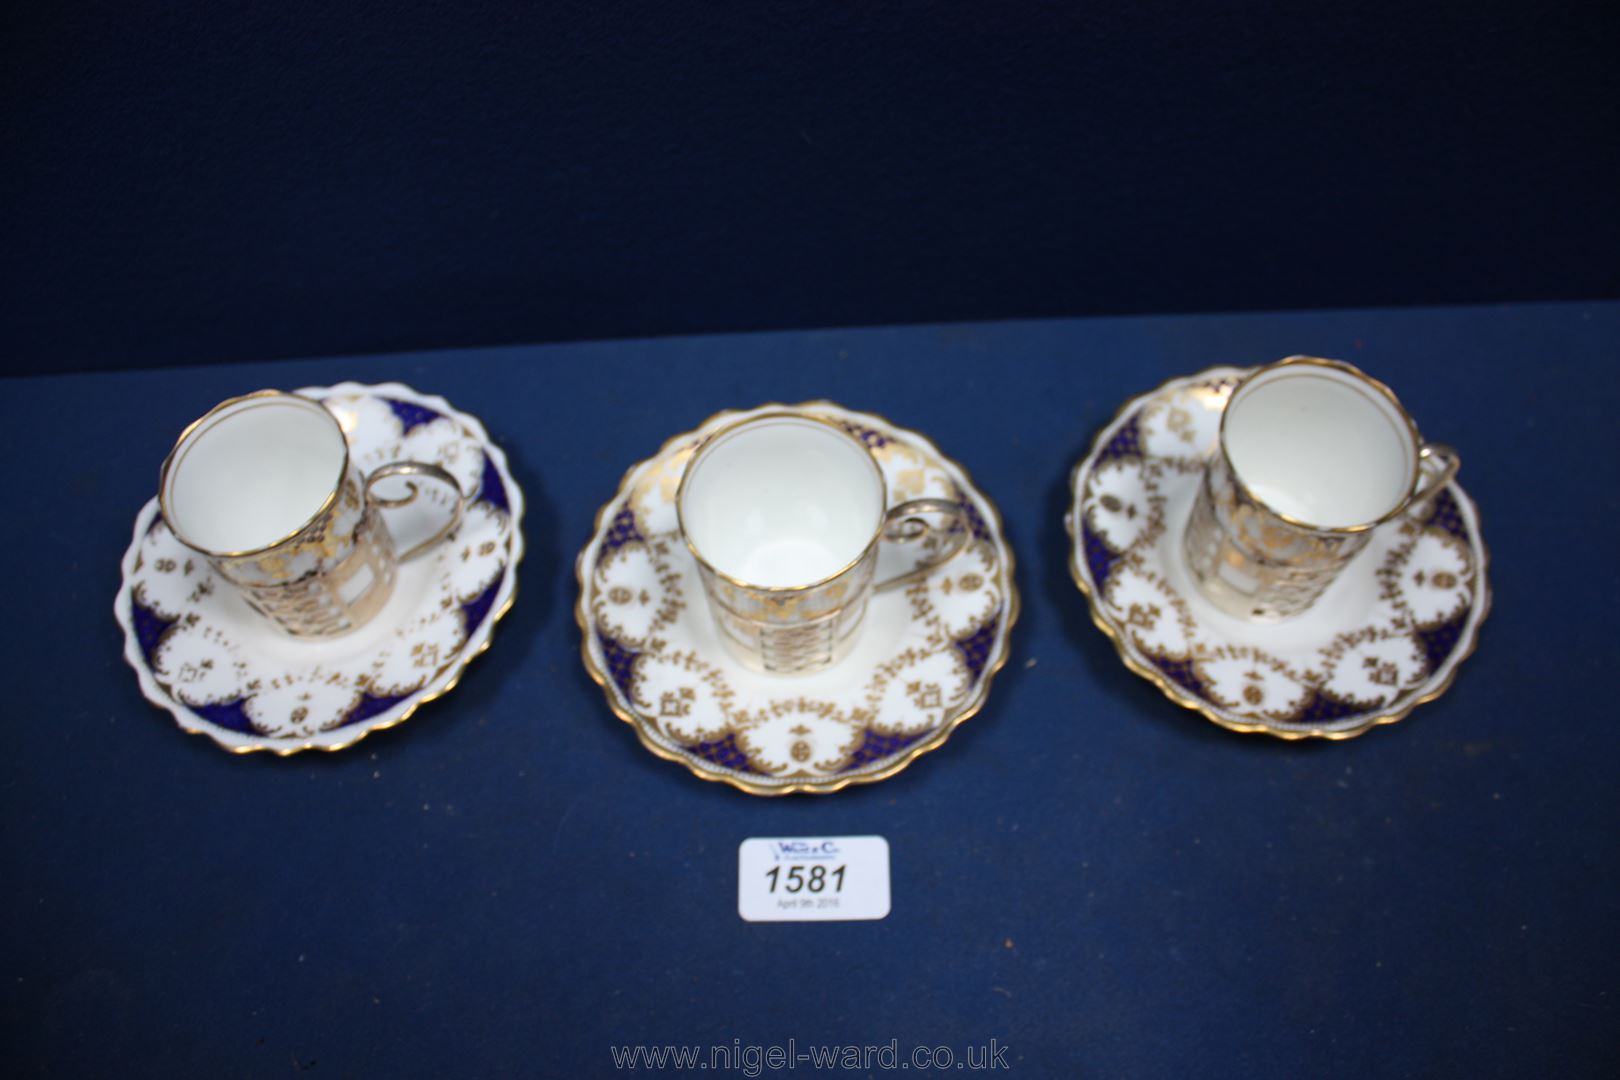 Three Aynsley coffee Cans and saucers, in solid silver holders, 1925, Sheffield. - Image 2 of 3